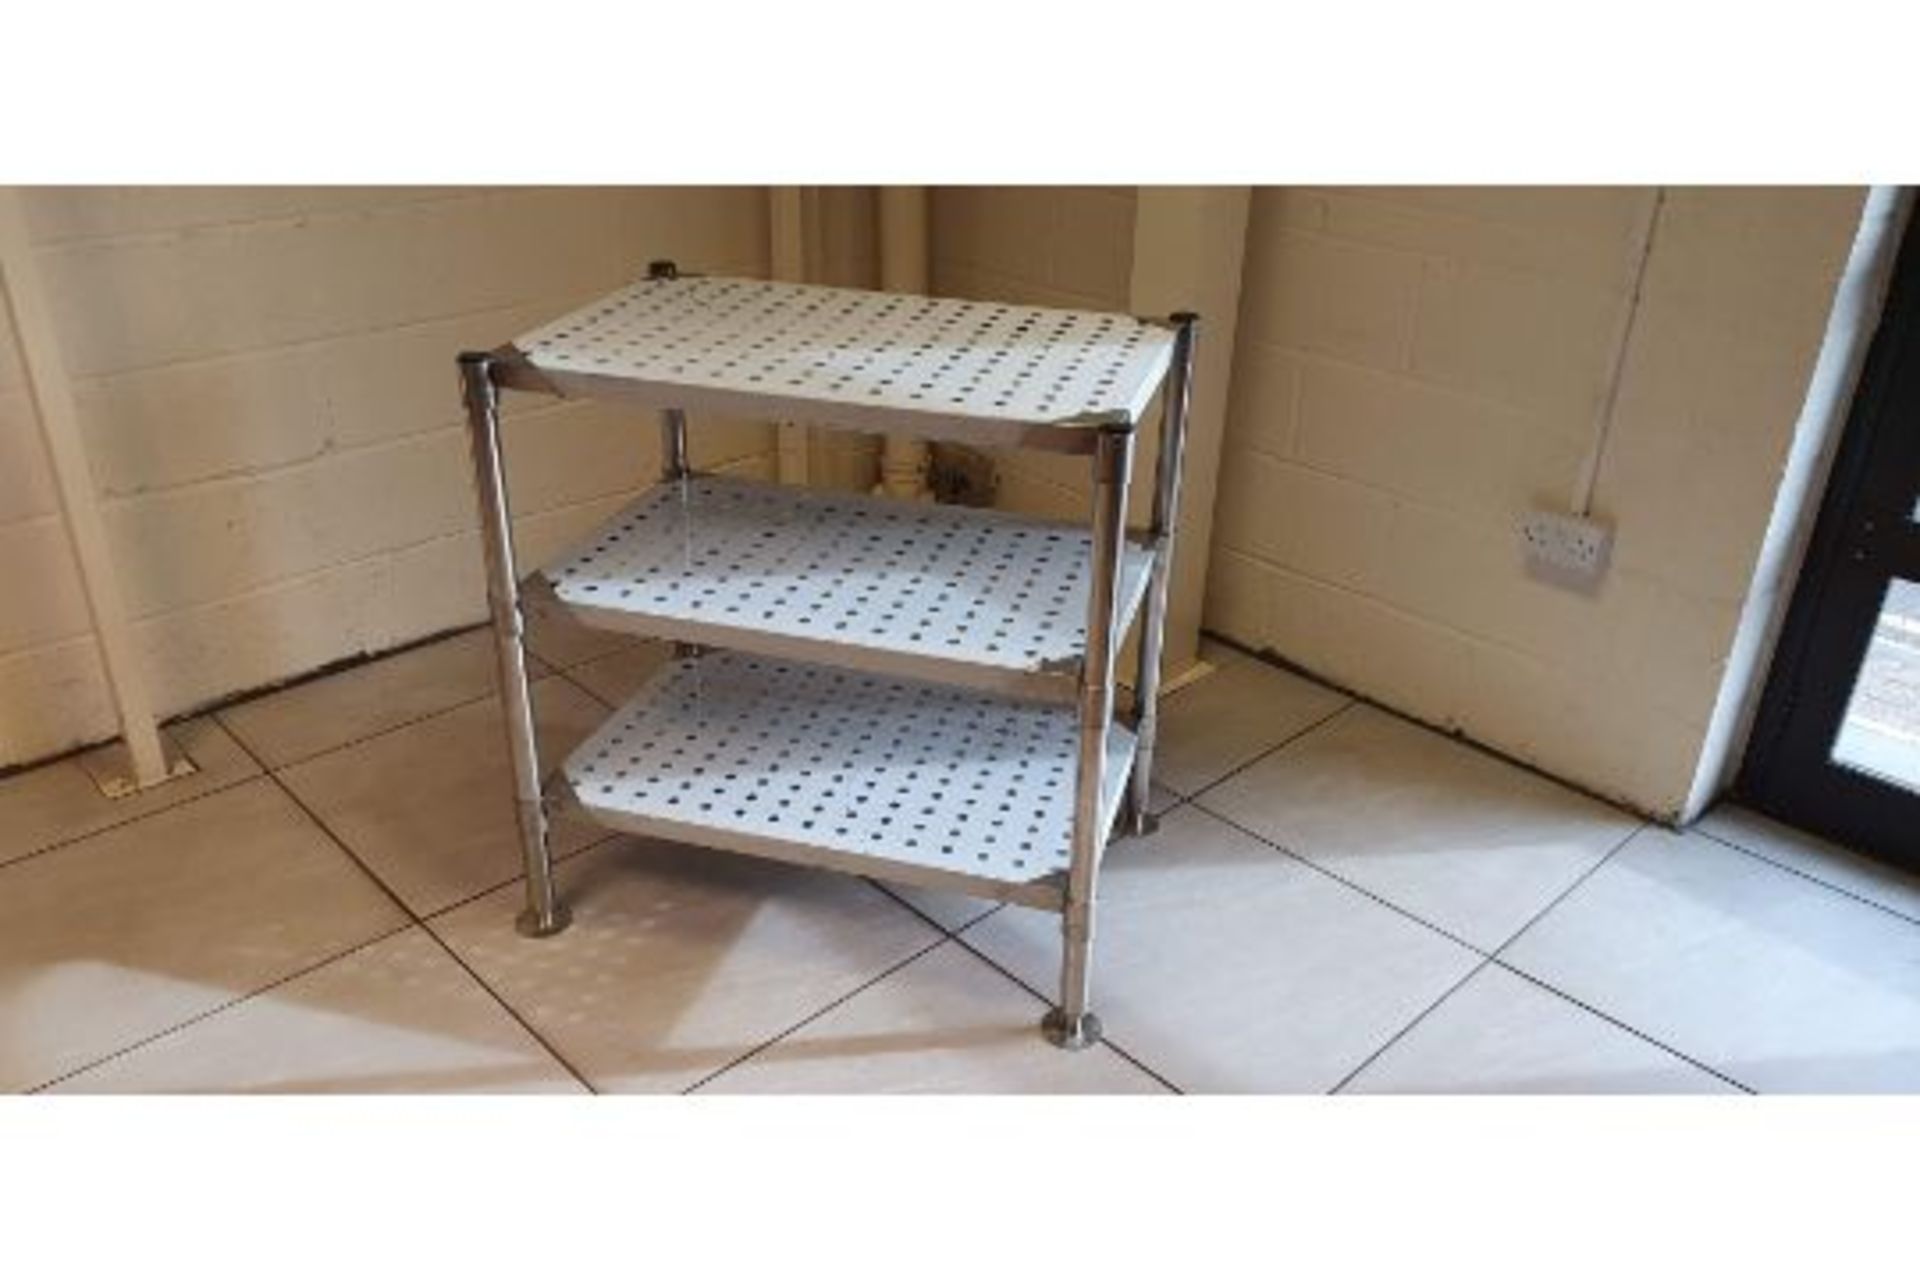 Stainless Steel Perforated Storage Size in millimetres: 1200 mm long x 610 mm deep x 900 mm high 3 x